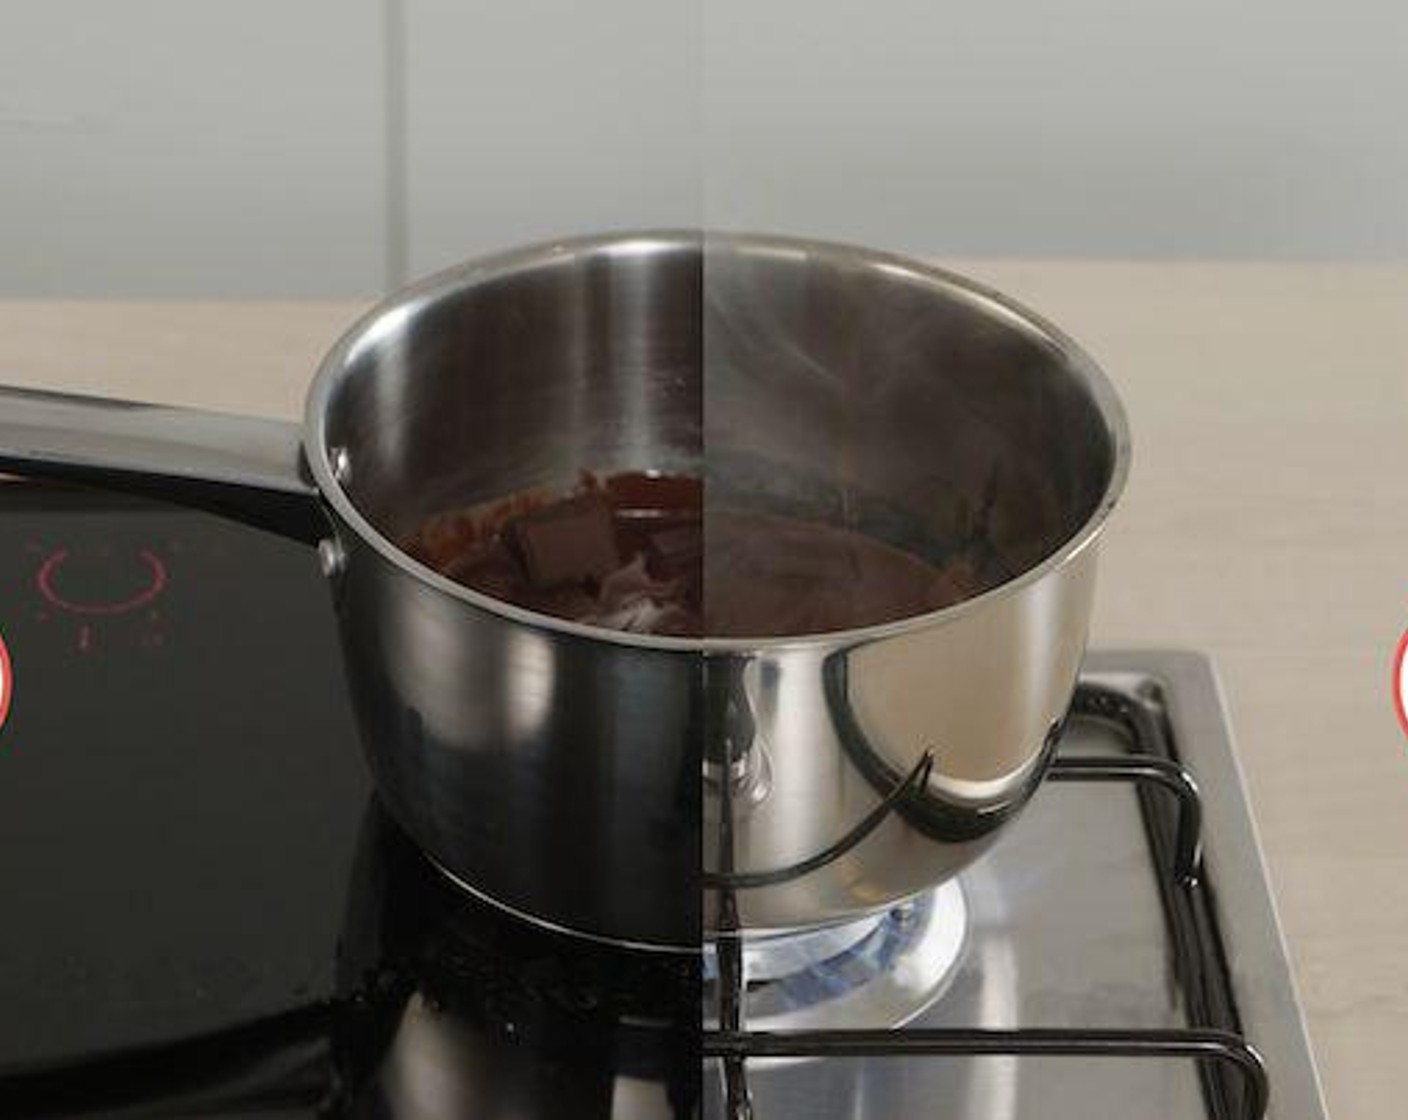 step 2 Induction allows you to provide a consistent, low temperature perfect for melting. So say goodbye to extra dishes and water baths. It also heats up your cookware directly, is 30% more efficient than gas, and helps keep your kitchen cool.